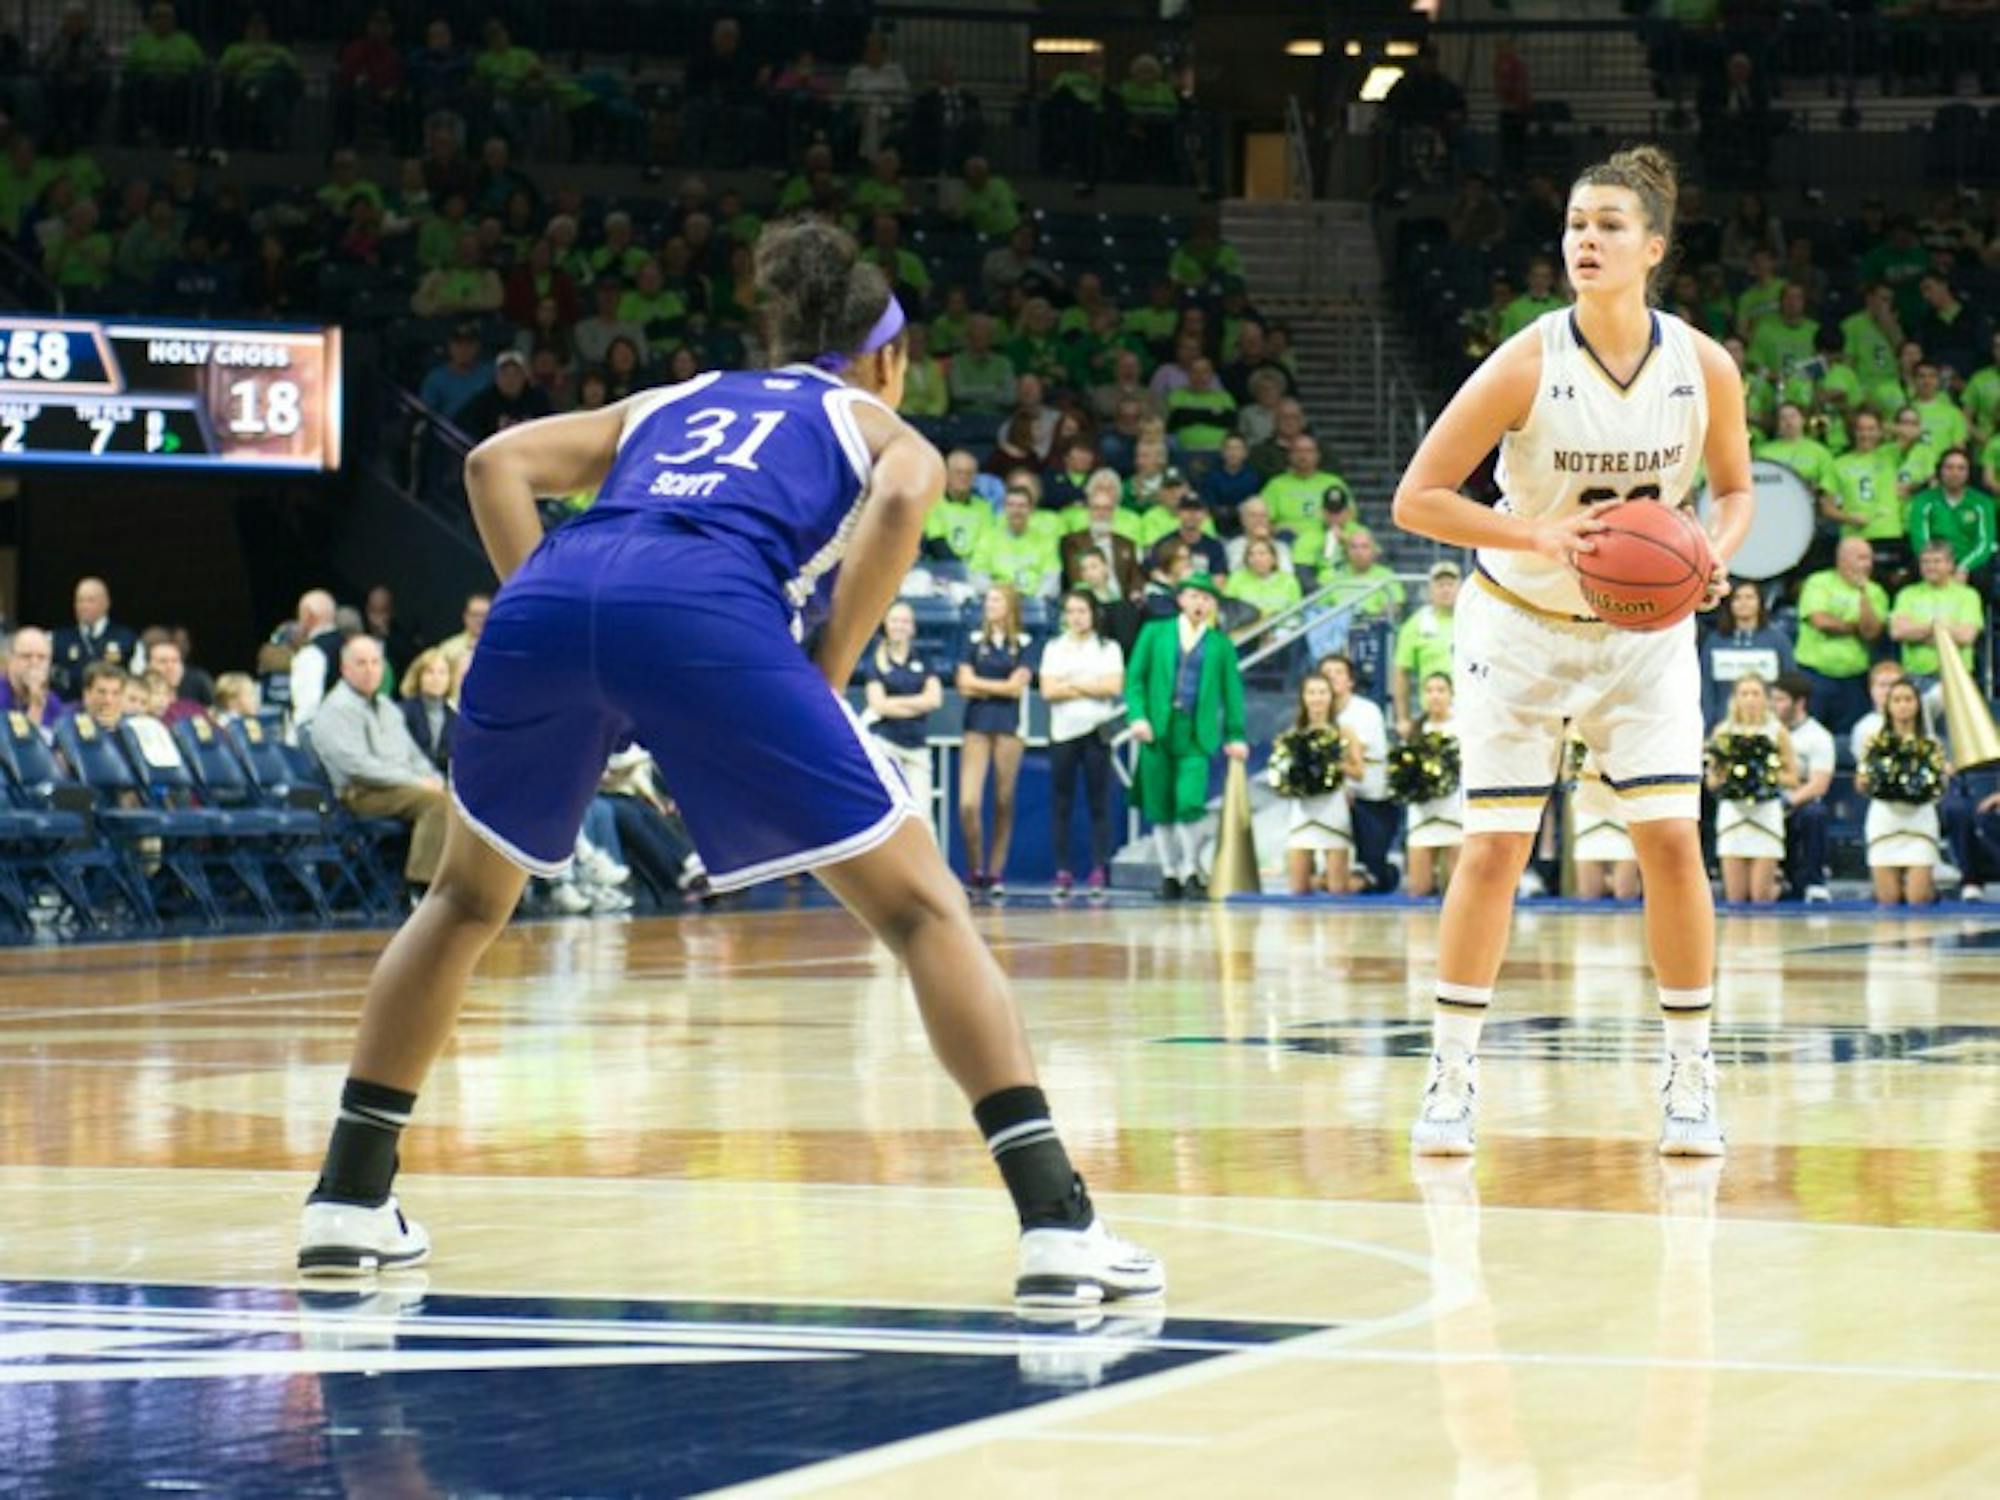 Notre Dame freshman forward Kathryn Westbeld looks up for a pass during the 104-29 win over Holy Cross in the Purcell Pavilion on Nov. 23.